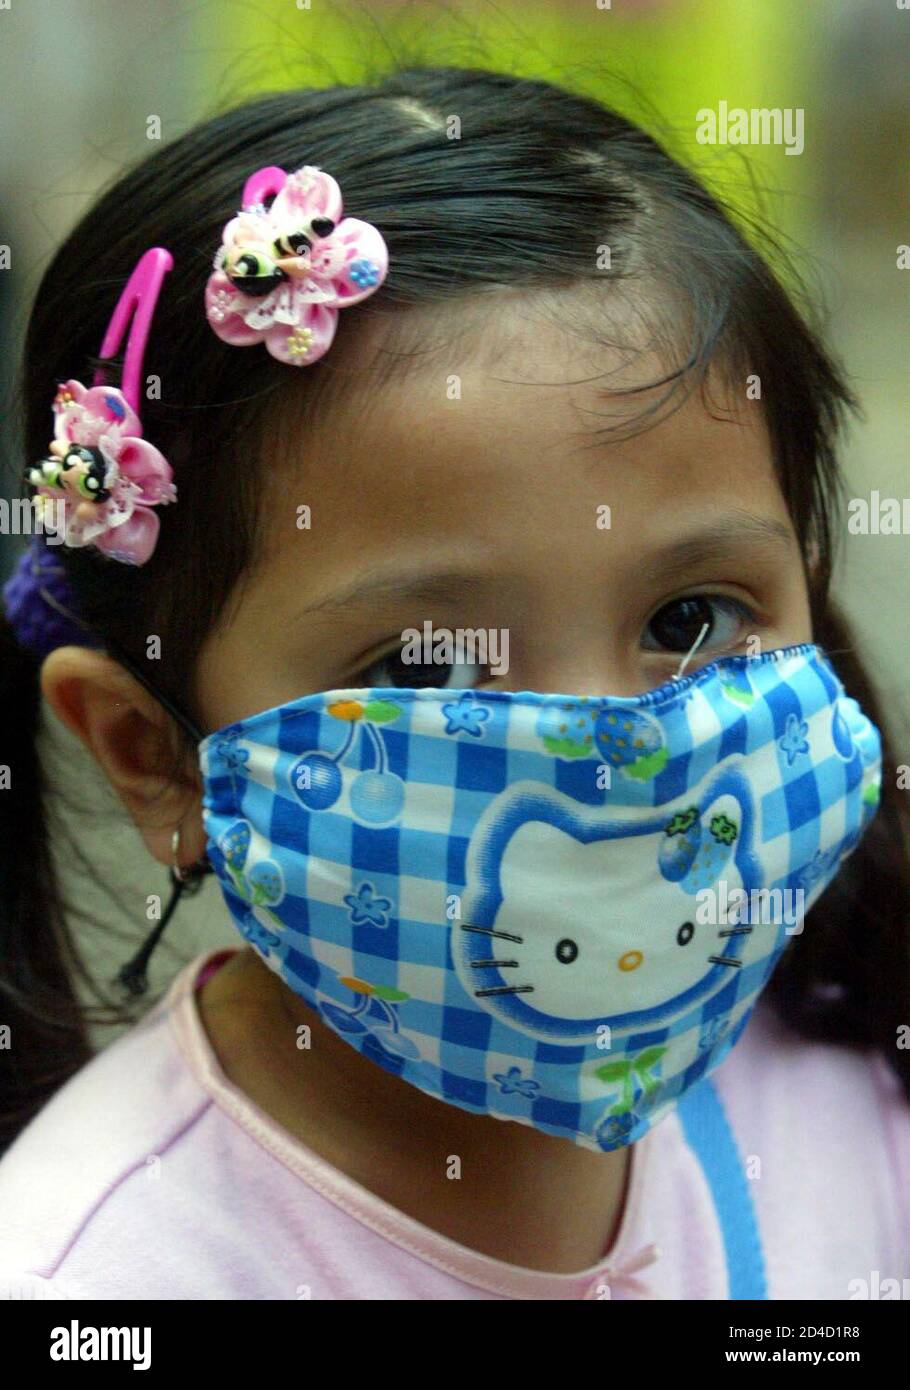 - PHOTO TAKEN 02APR03 - A girl wears a fashionable mask in Hong Kong to protect herself against the Severe Acute Respiratory Syndrome (SARS) April 2, 2003. Millions of residents in the territory wear masks on streets as the killer virus spread around. Stock Photo